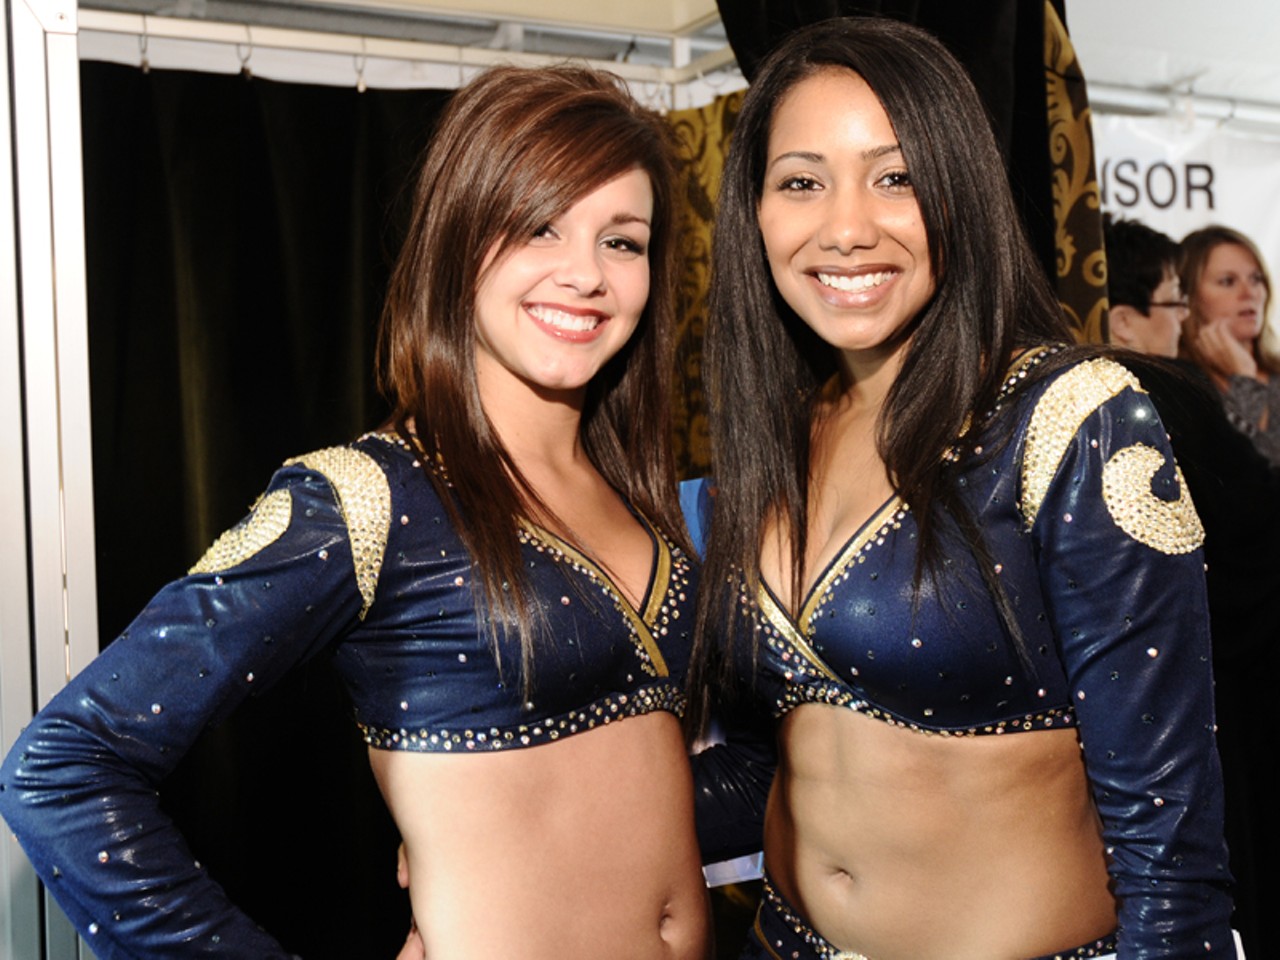 Obligatory Rams babe photo. Plenty more near the end of this slideshow.